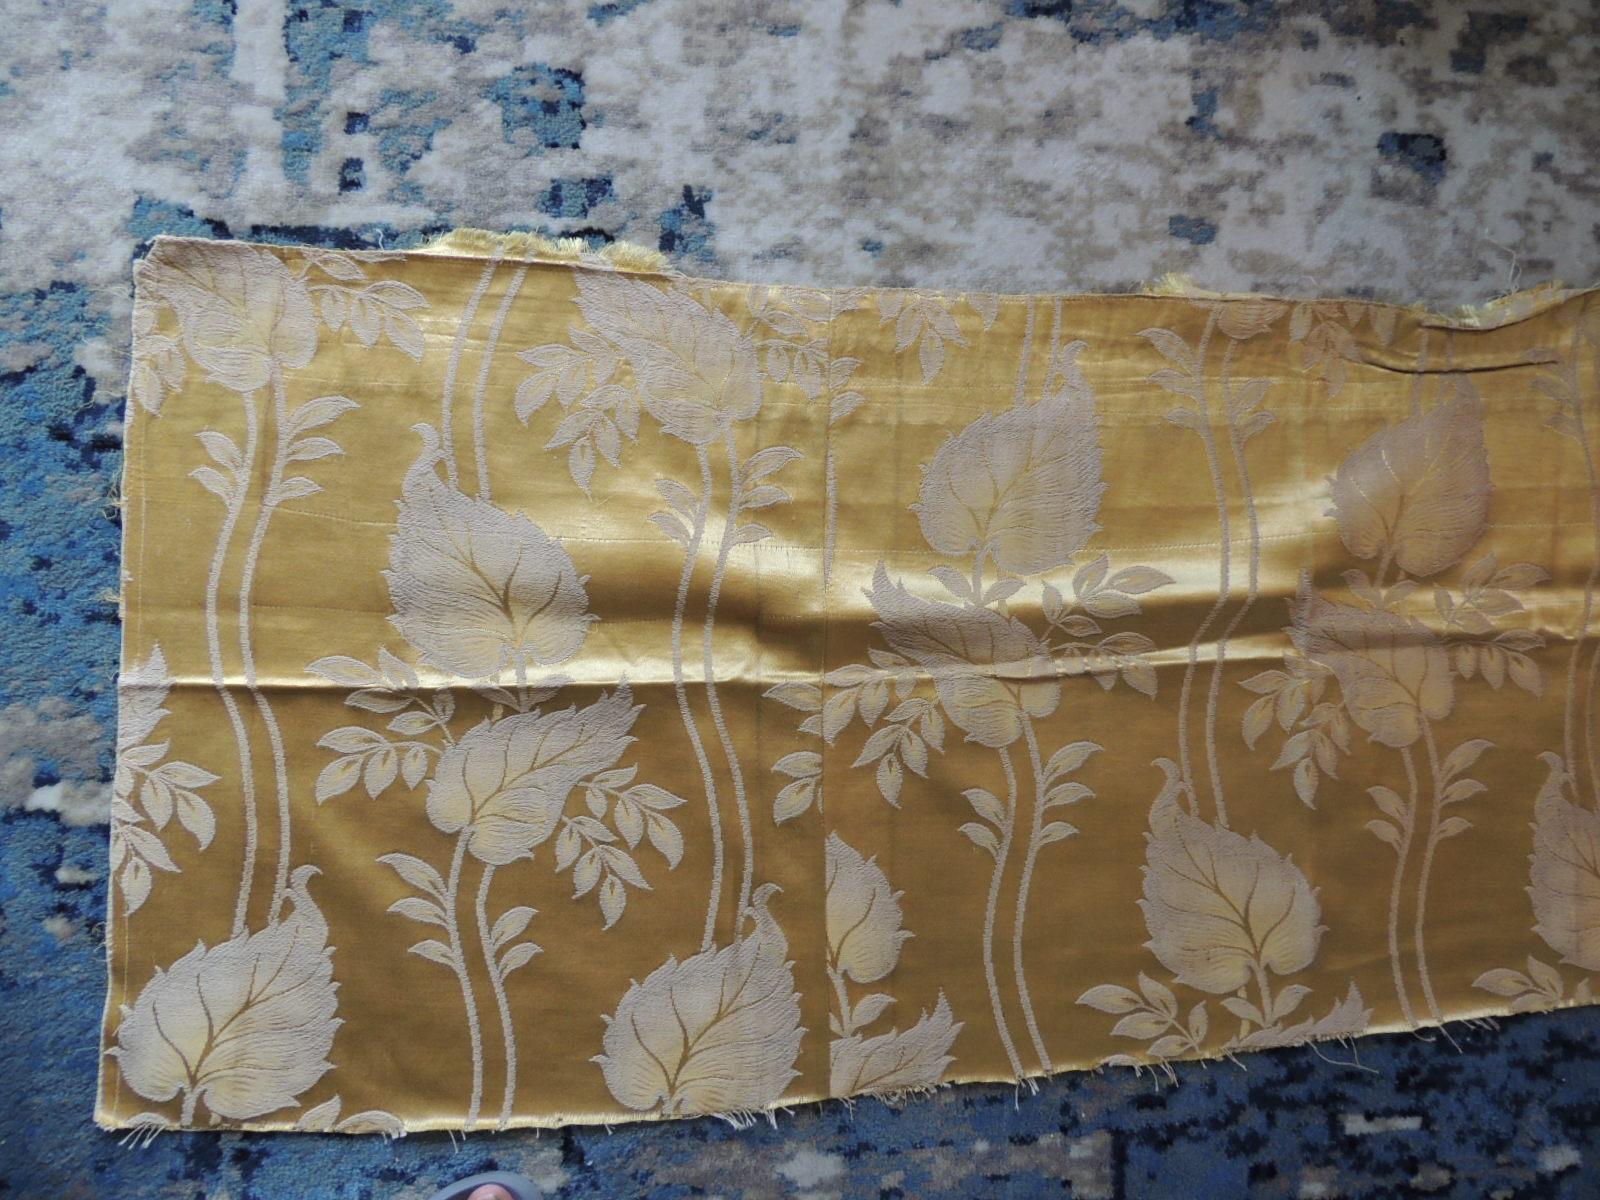 Vintage Gold floral silk Damask Textile fragment.
Two panels sewn together.
Ideal for pillows or upholstery.
Size: 21.5